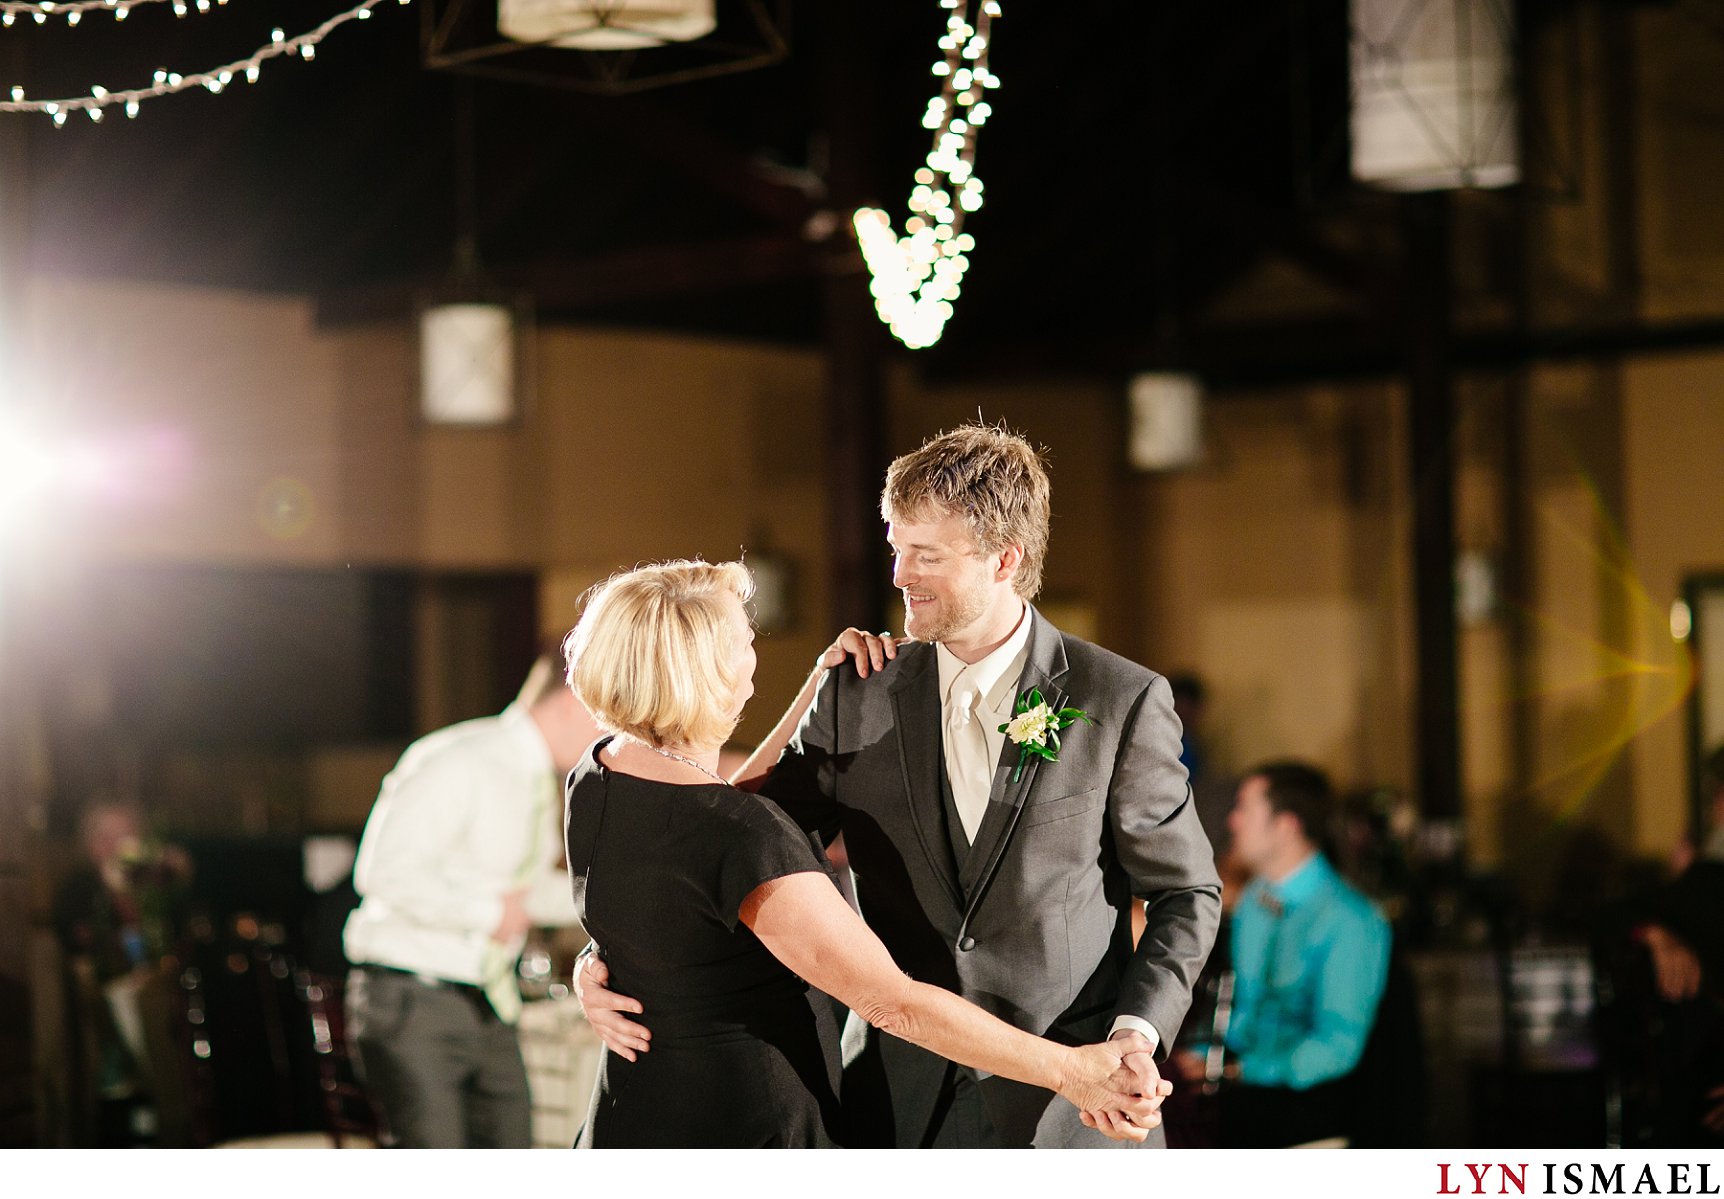 The groom dances with his mom.